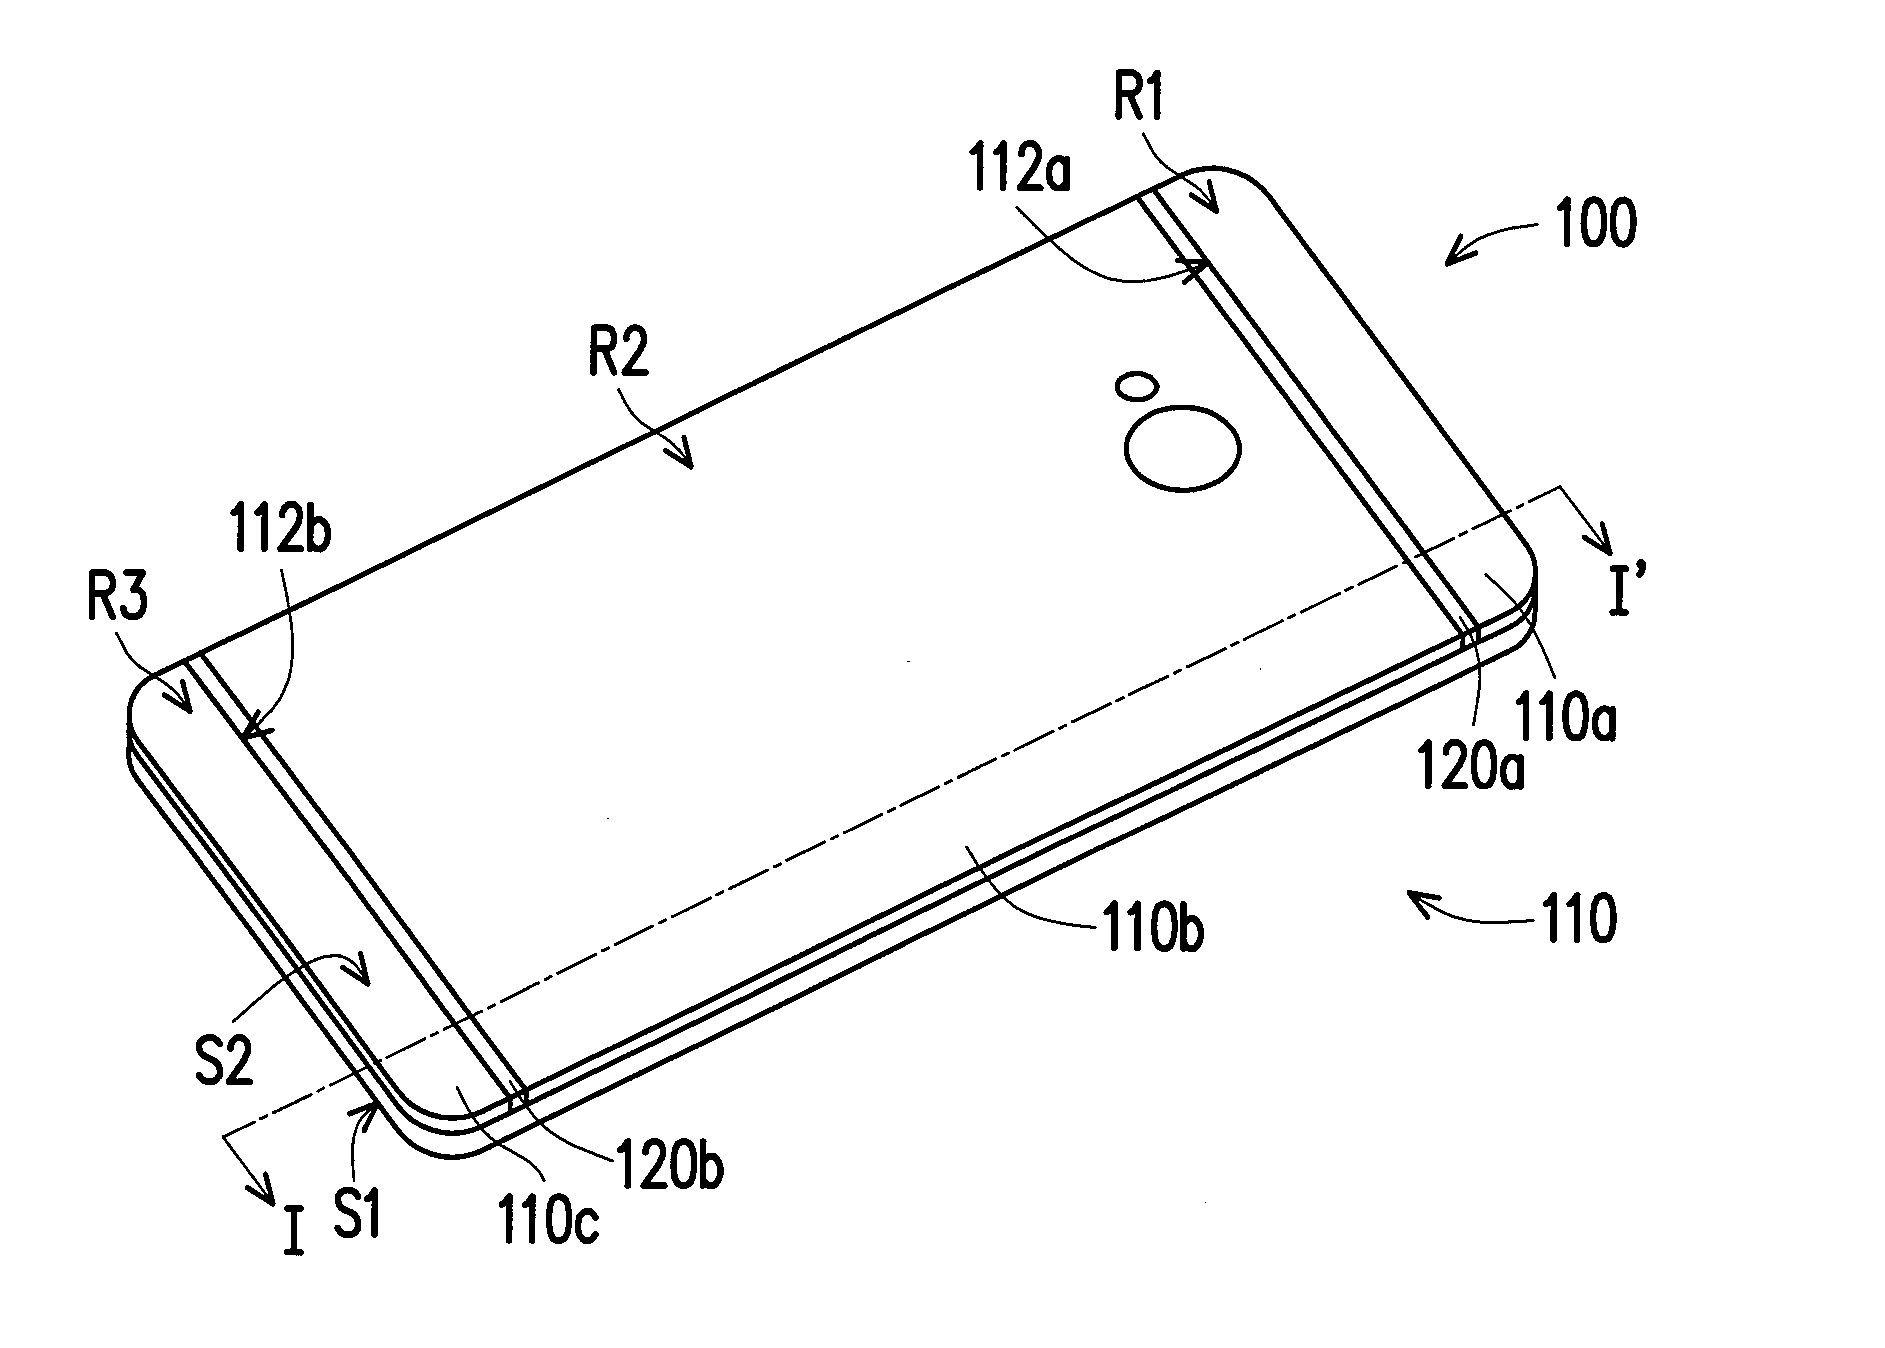 Casing of electronic device